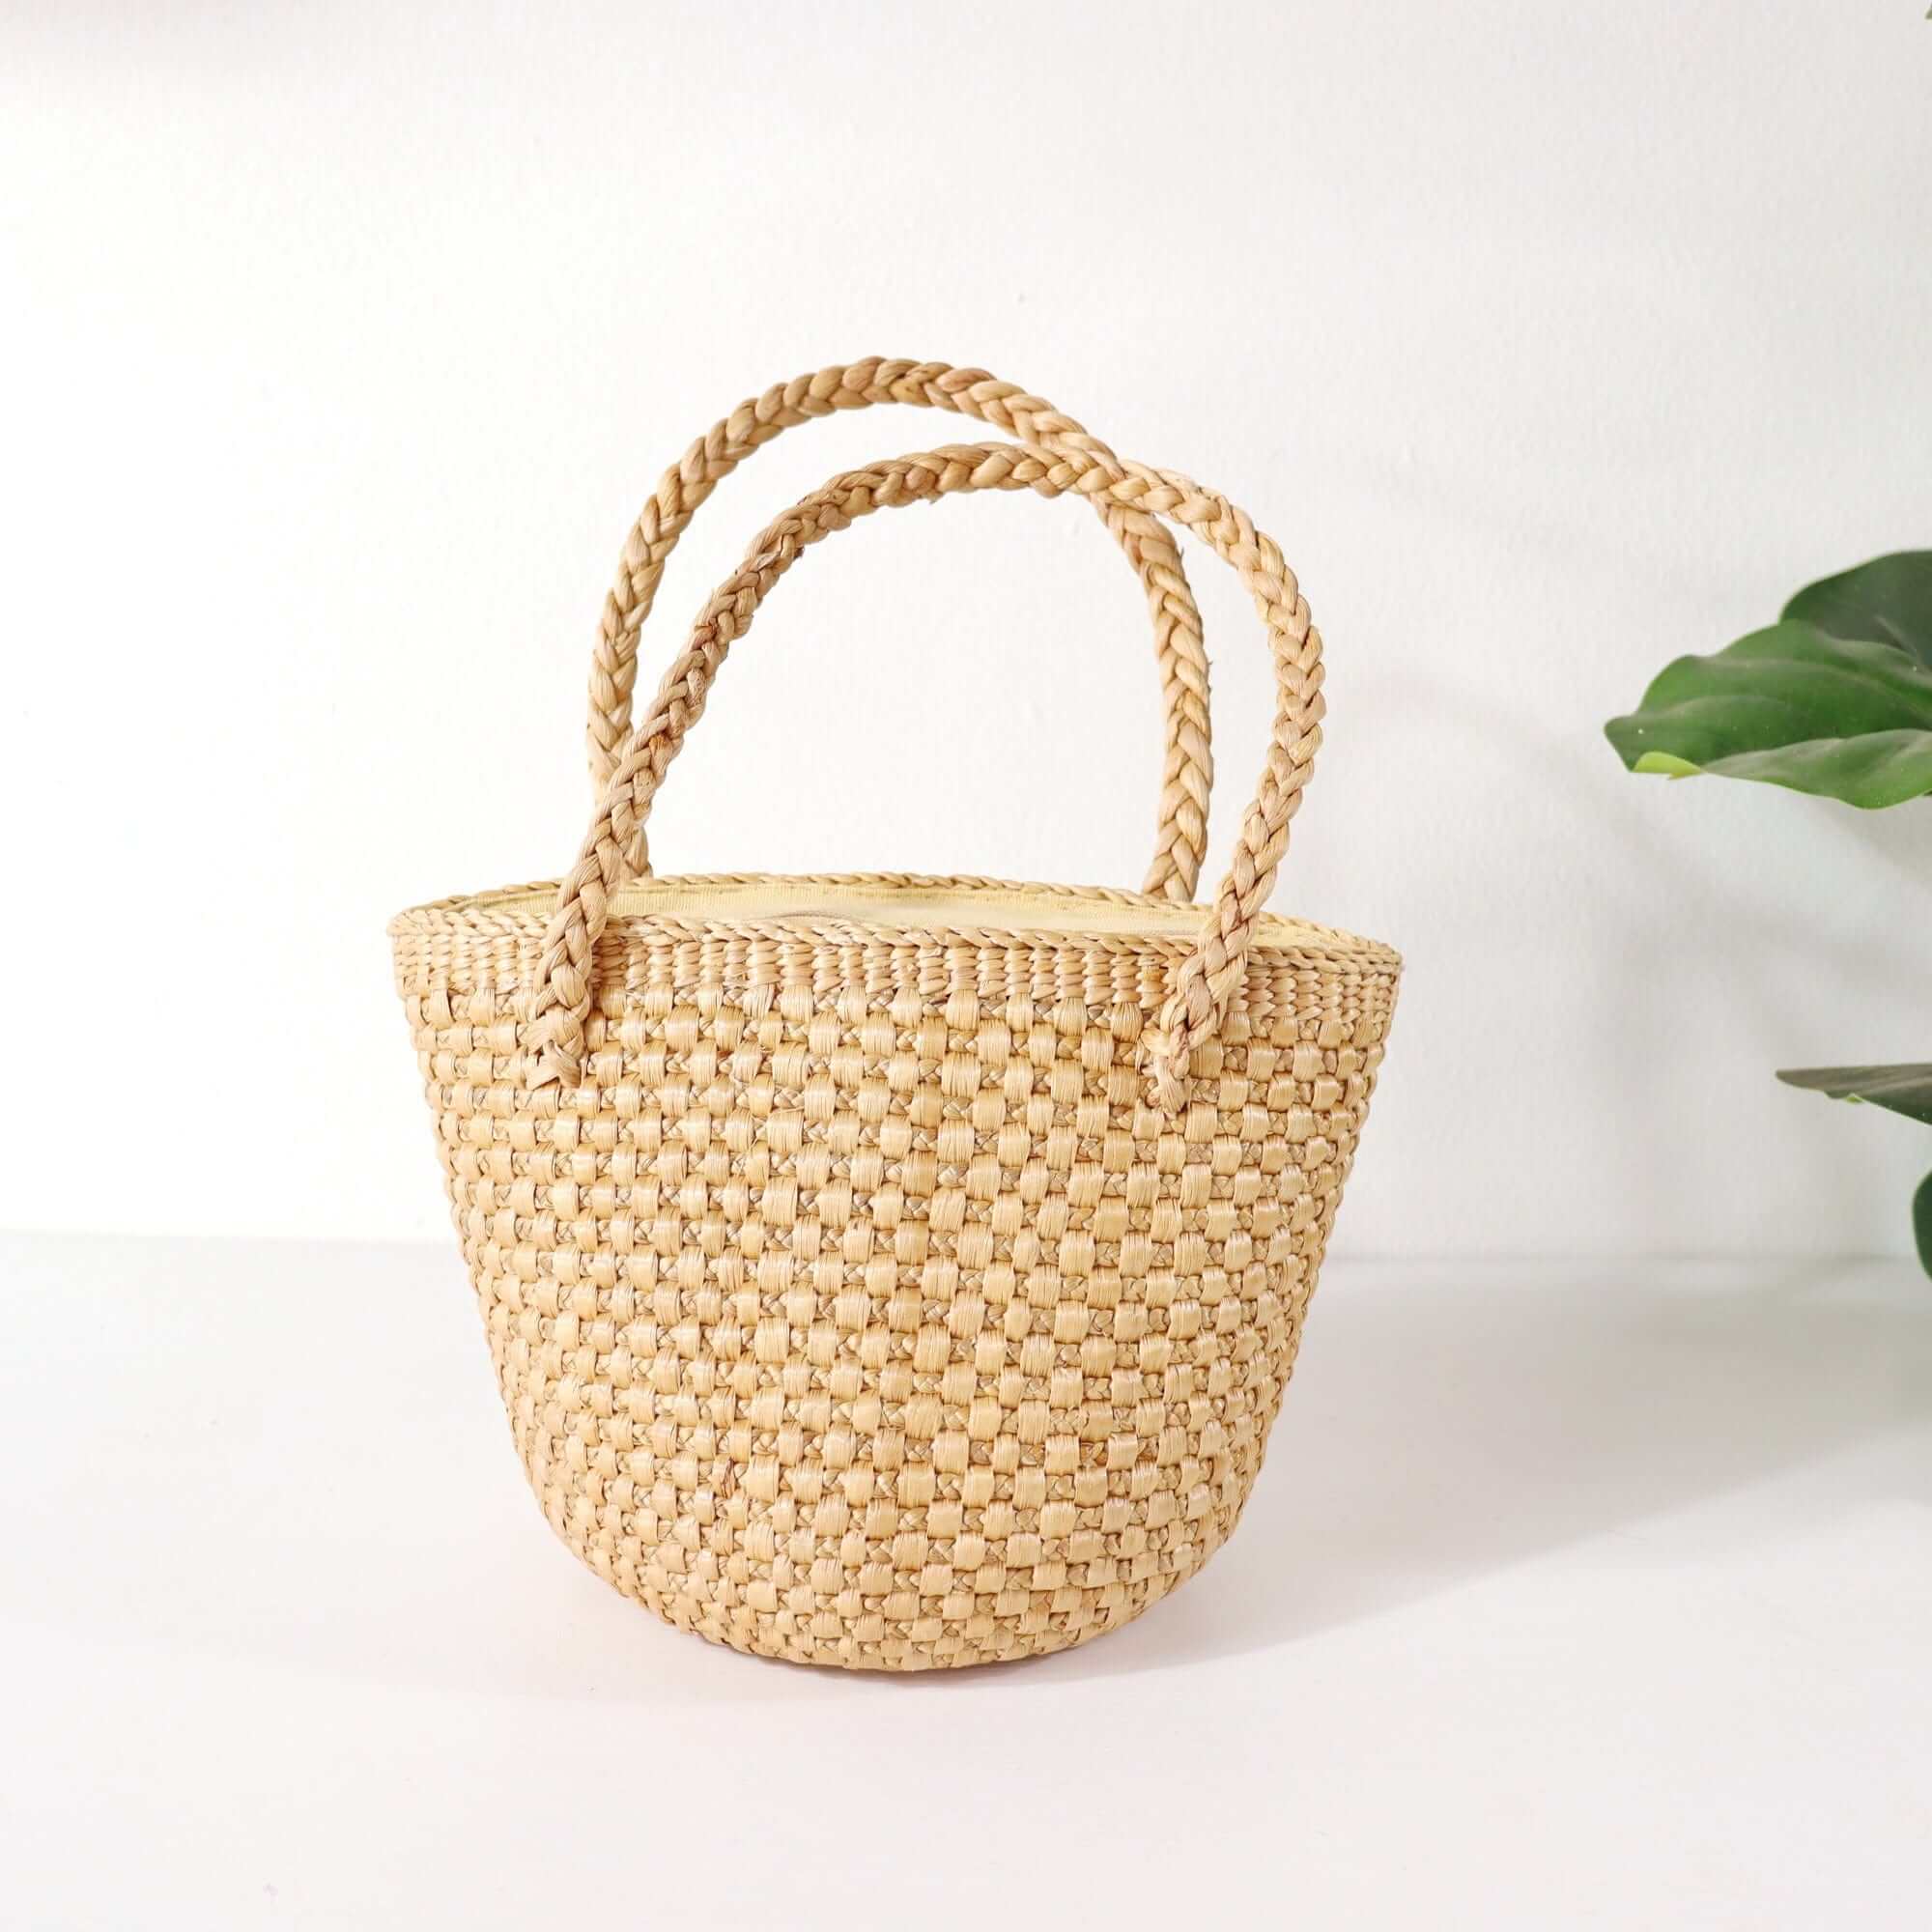 ANNMARIE - Straw Top Handle Bag